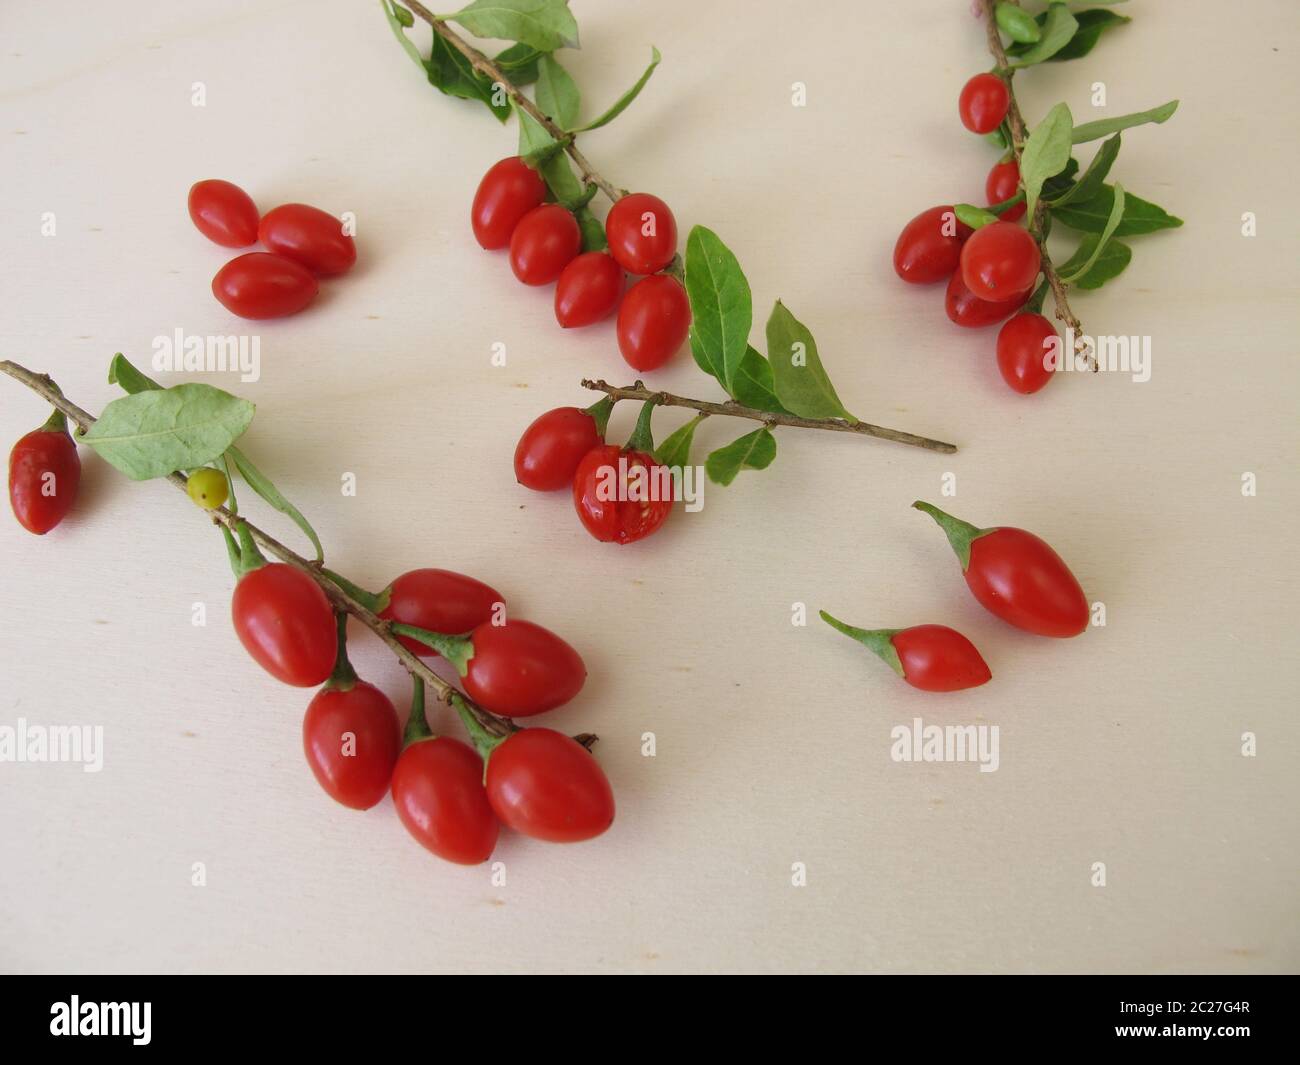 Freshly harvested goji berries, wolfberry on wooden board Stock Photo